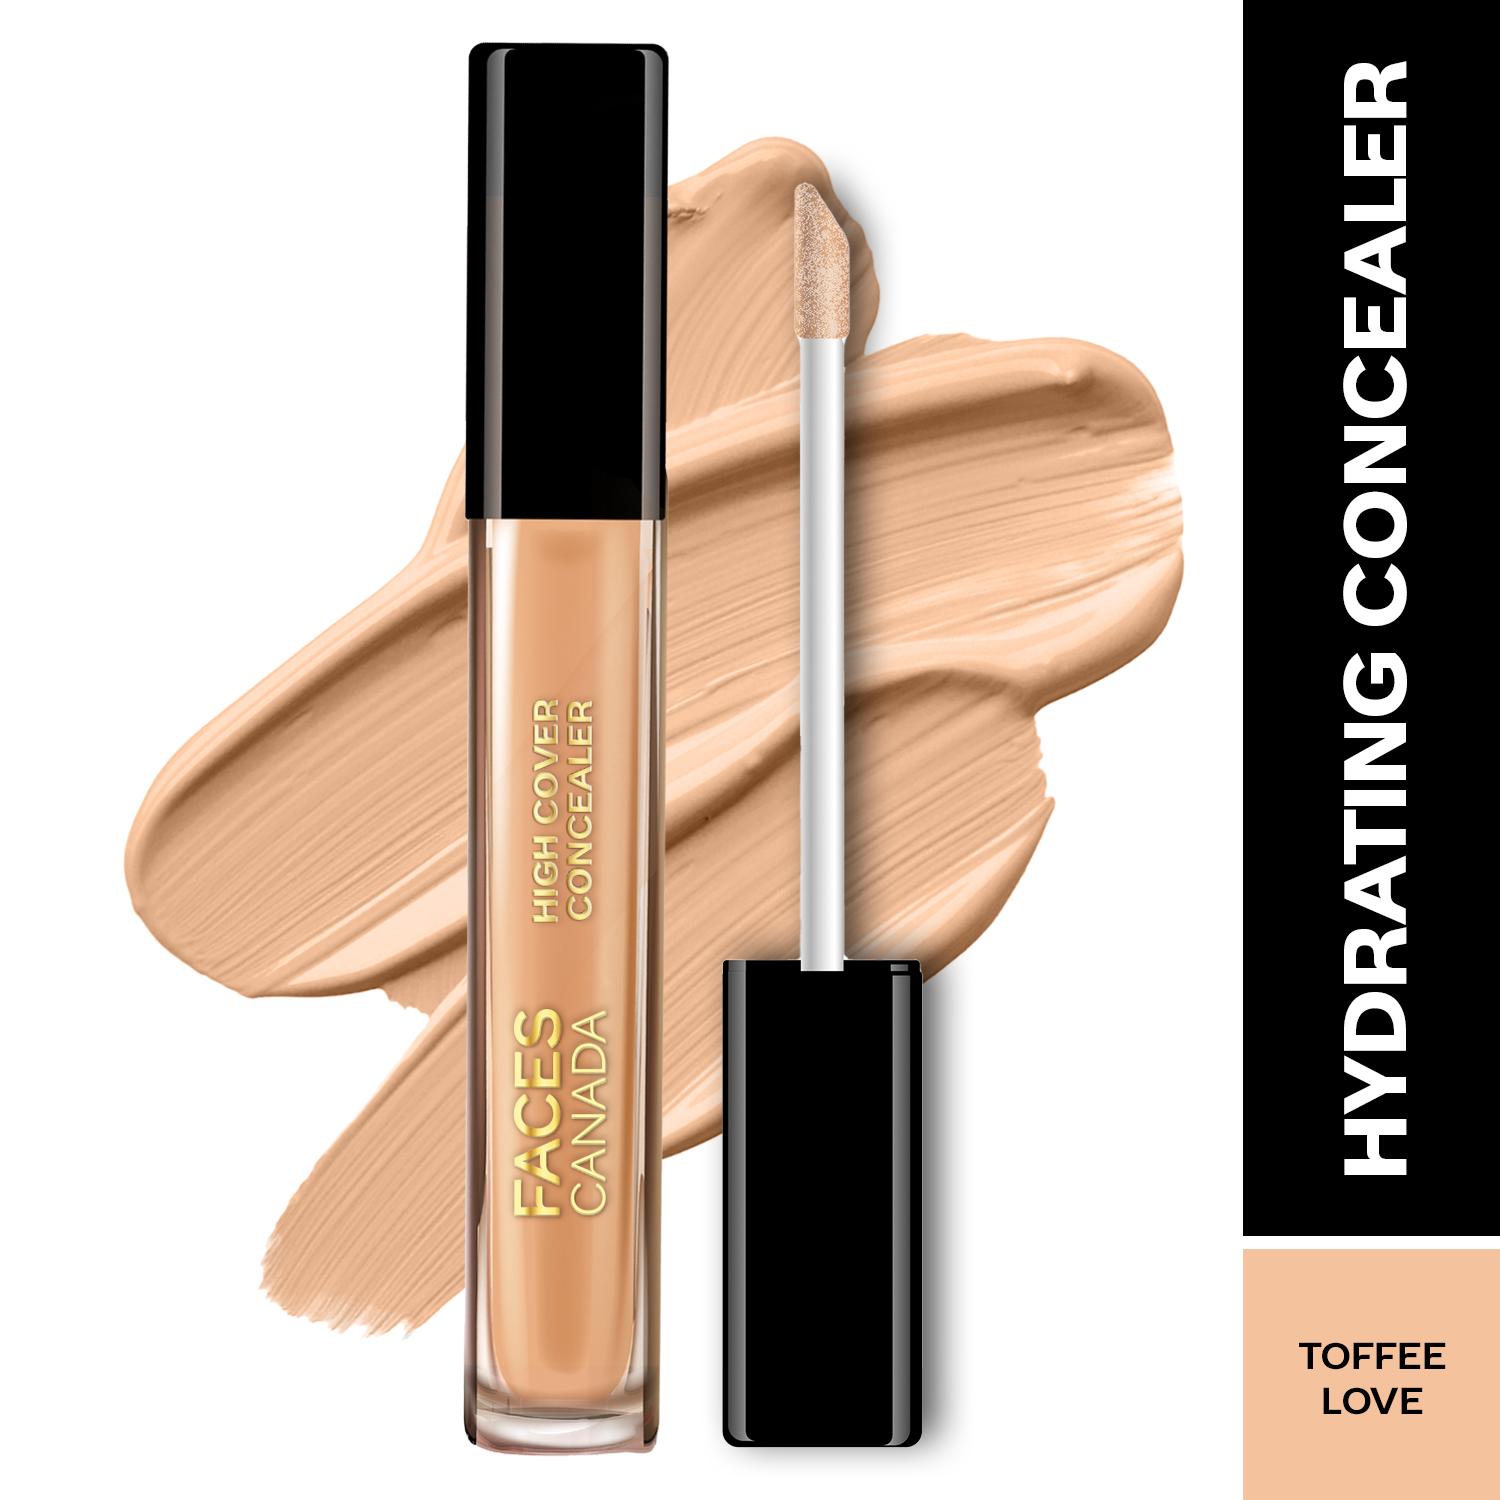 Faces Canada | Faces Canada High Cover Concealer - 04 Toffee Love (4ml)